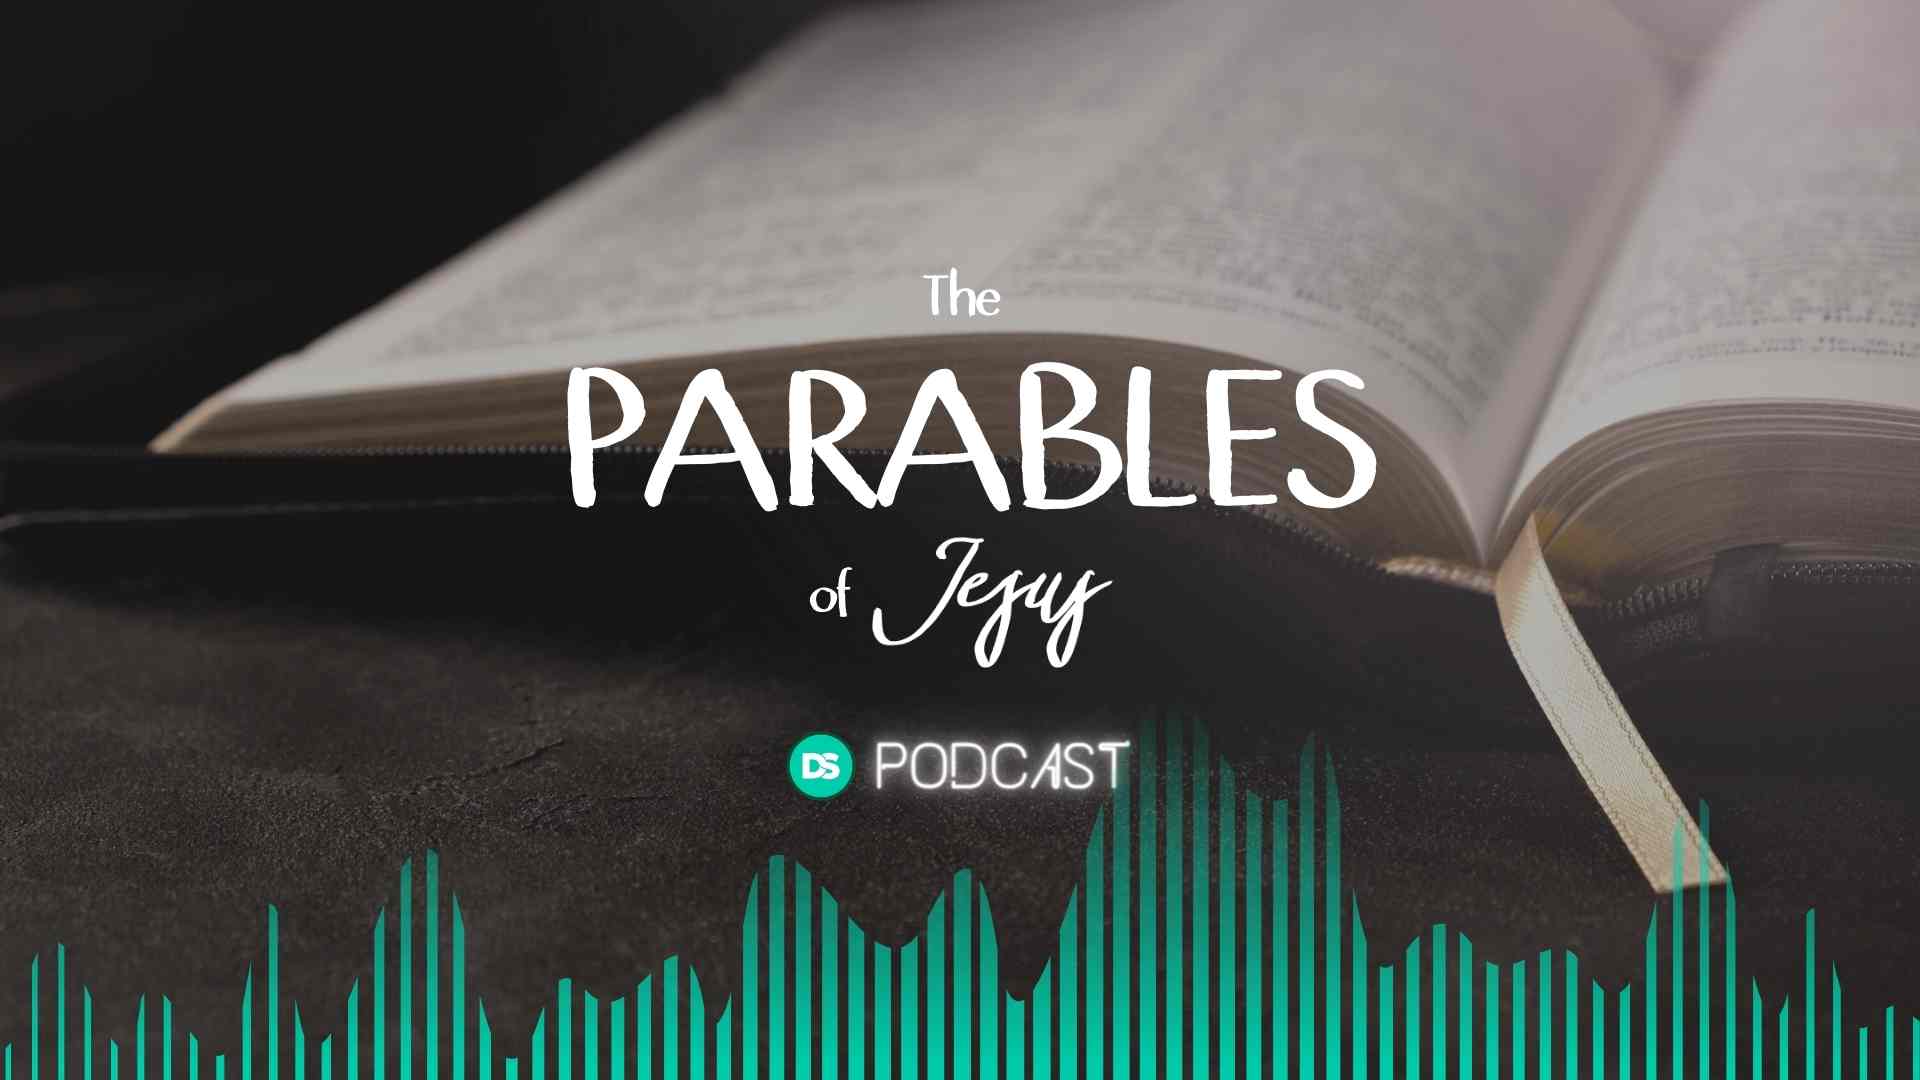 Introducing Our New Series on the Parables of Jesus 5